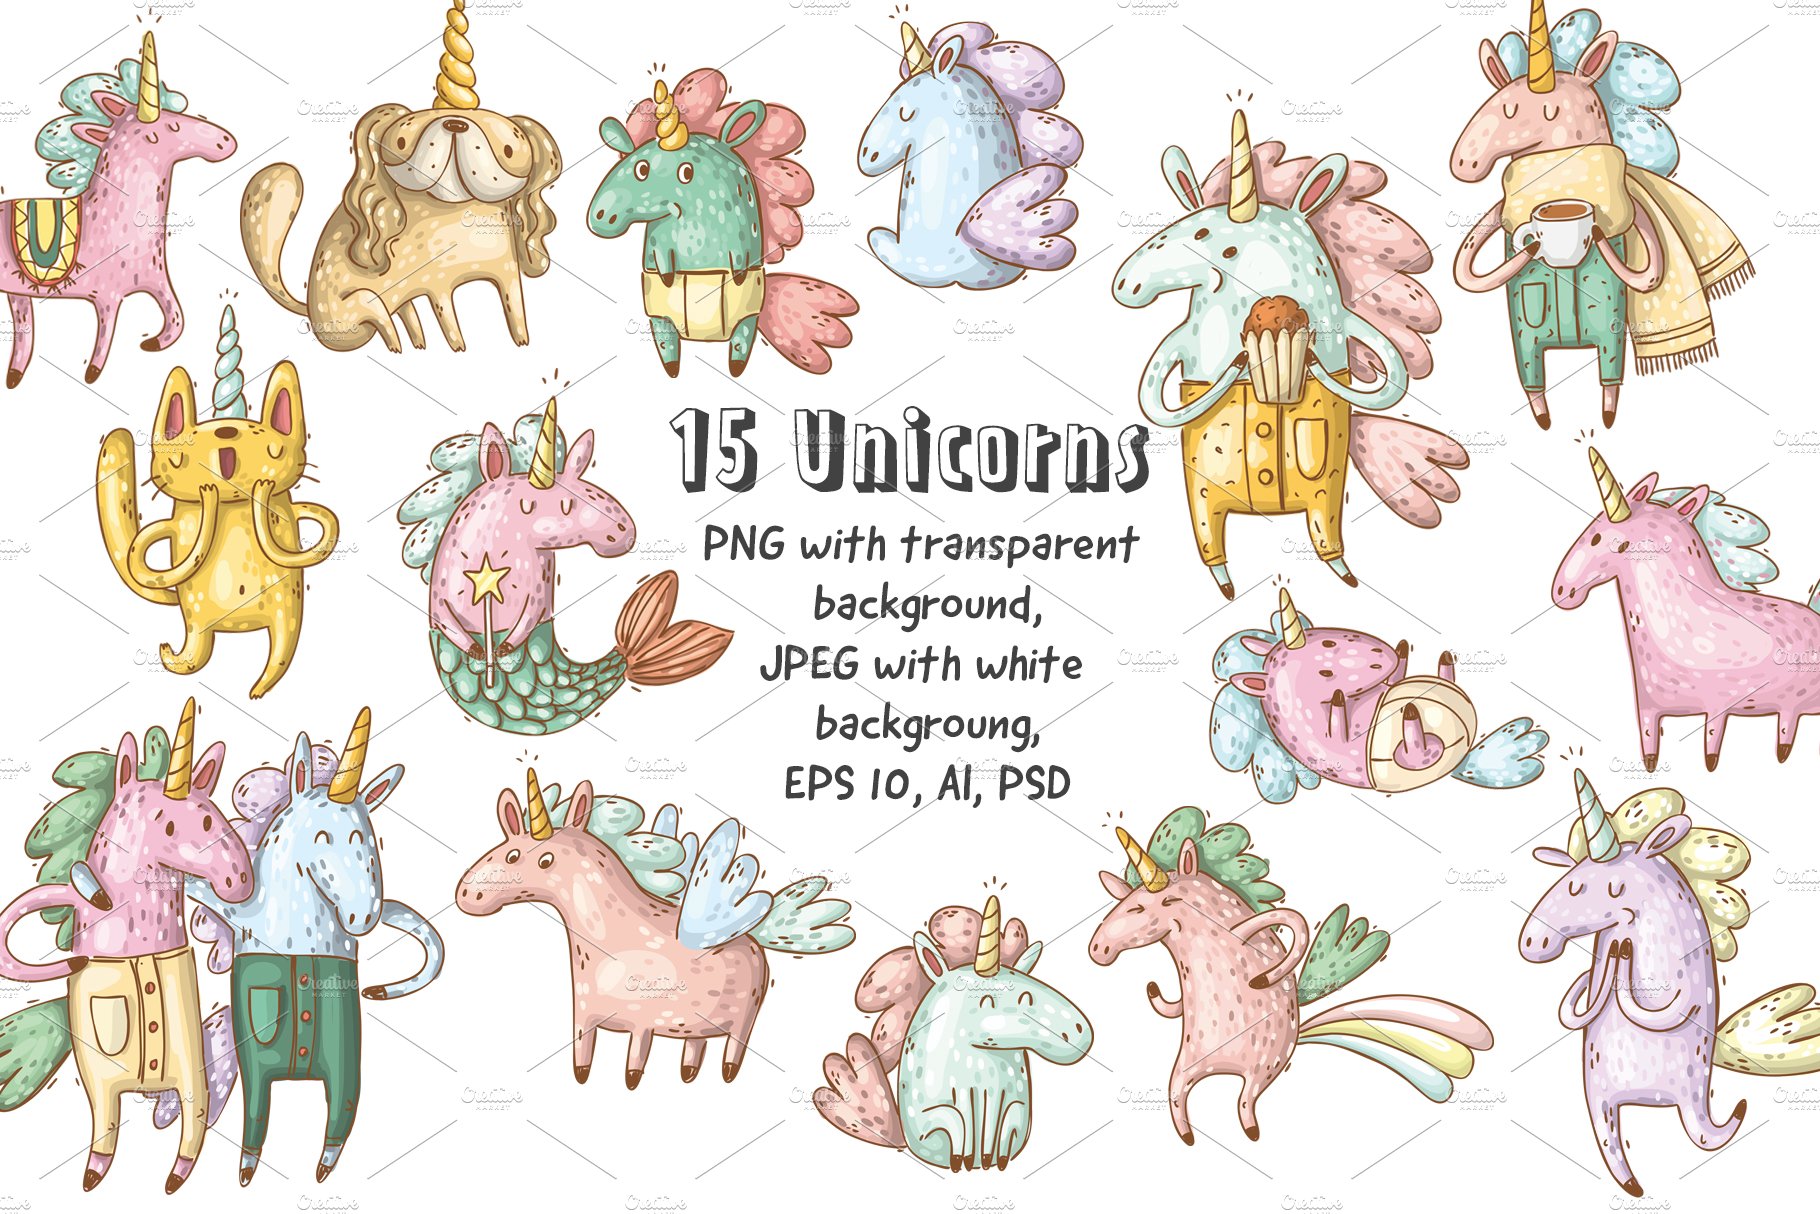 Unicorns and rainbows preview image.